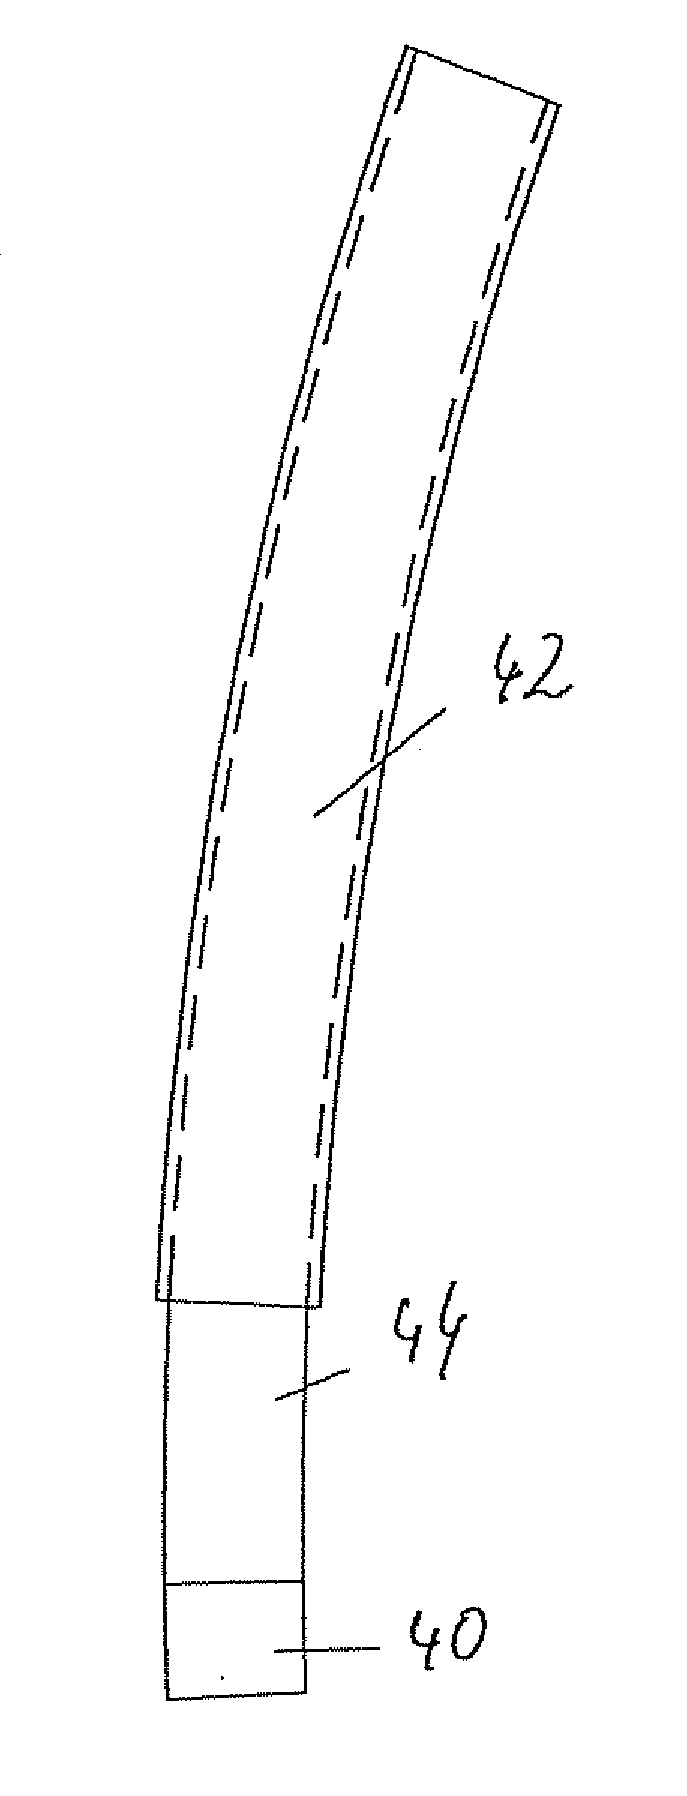 Escape Path Marking for an Aircraft